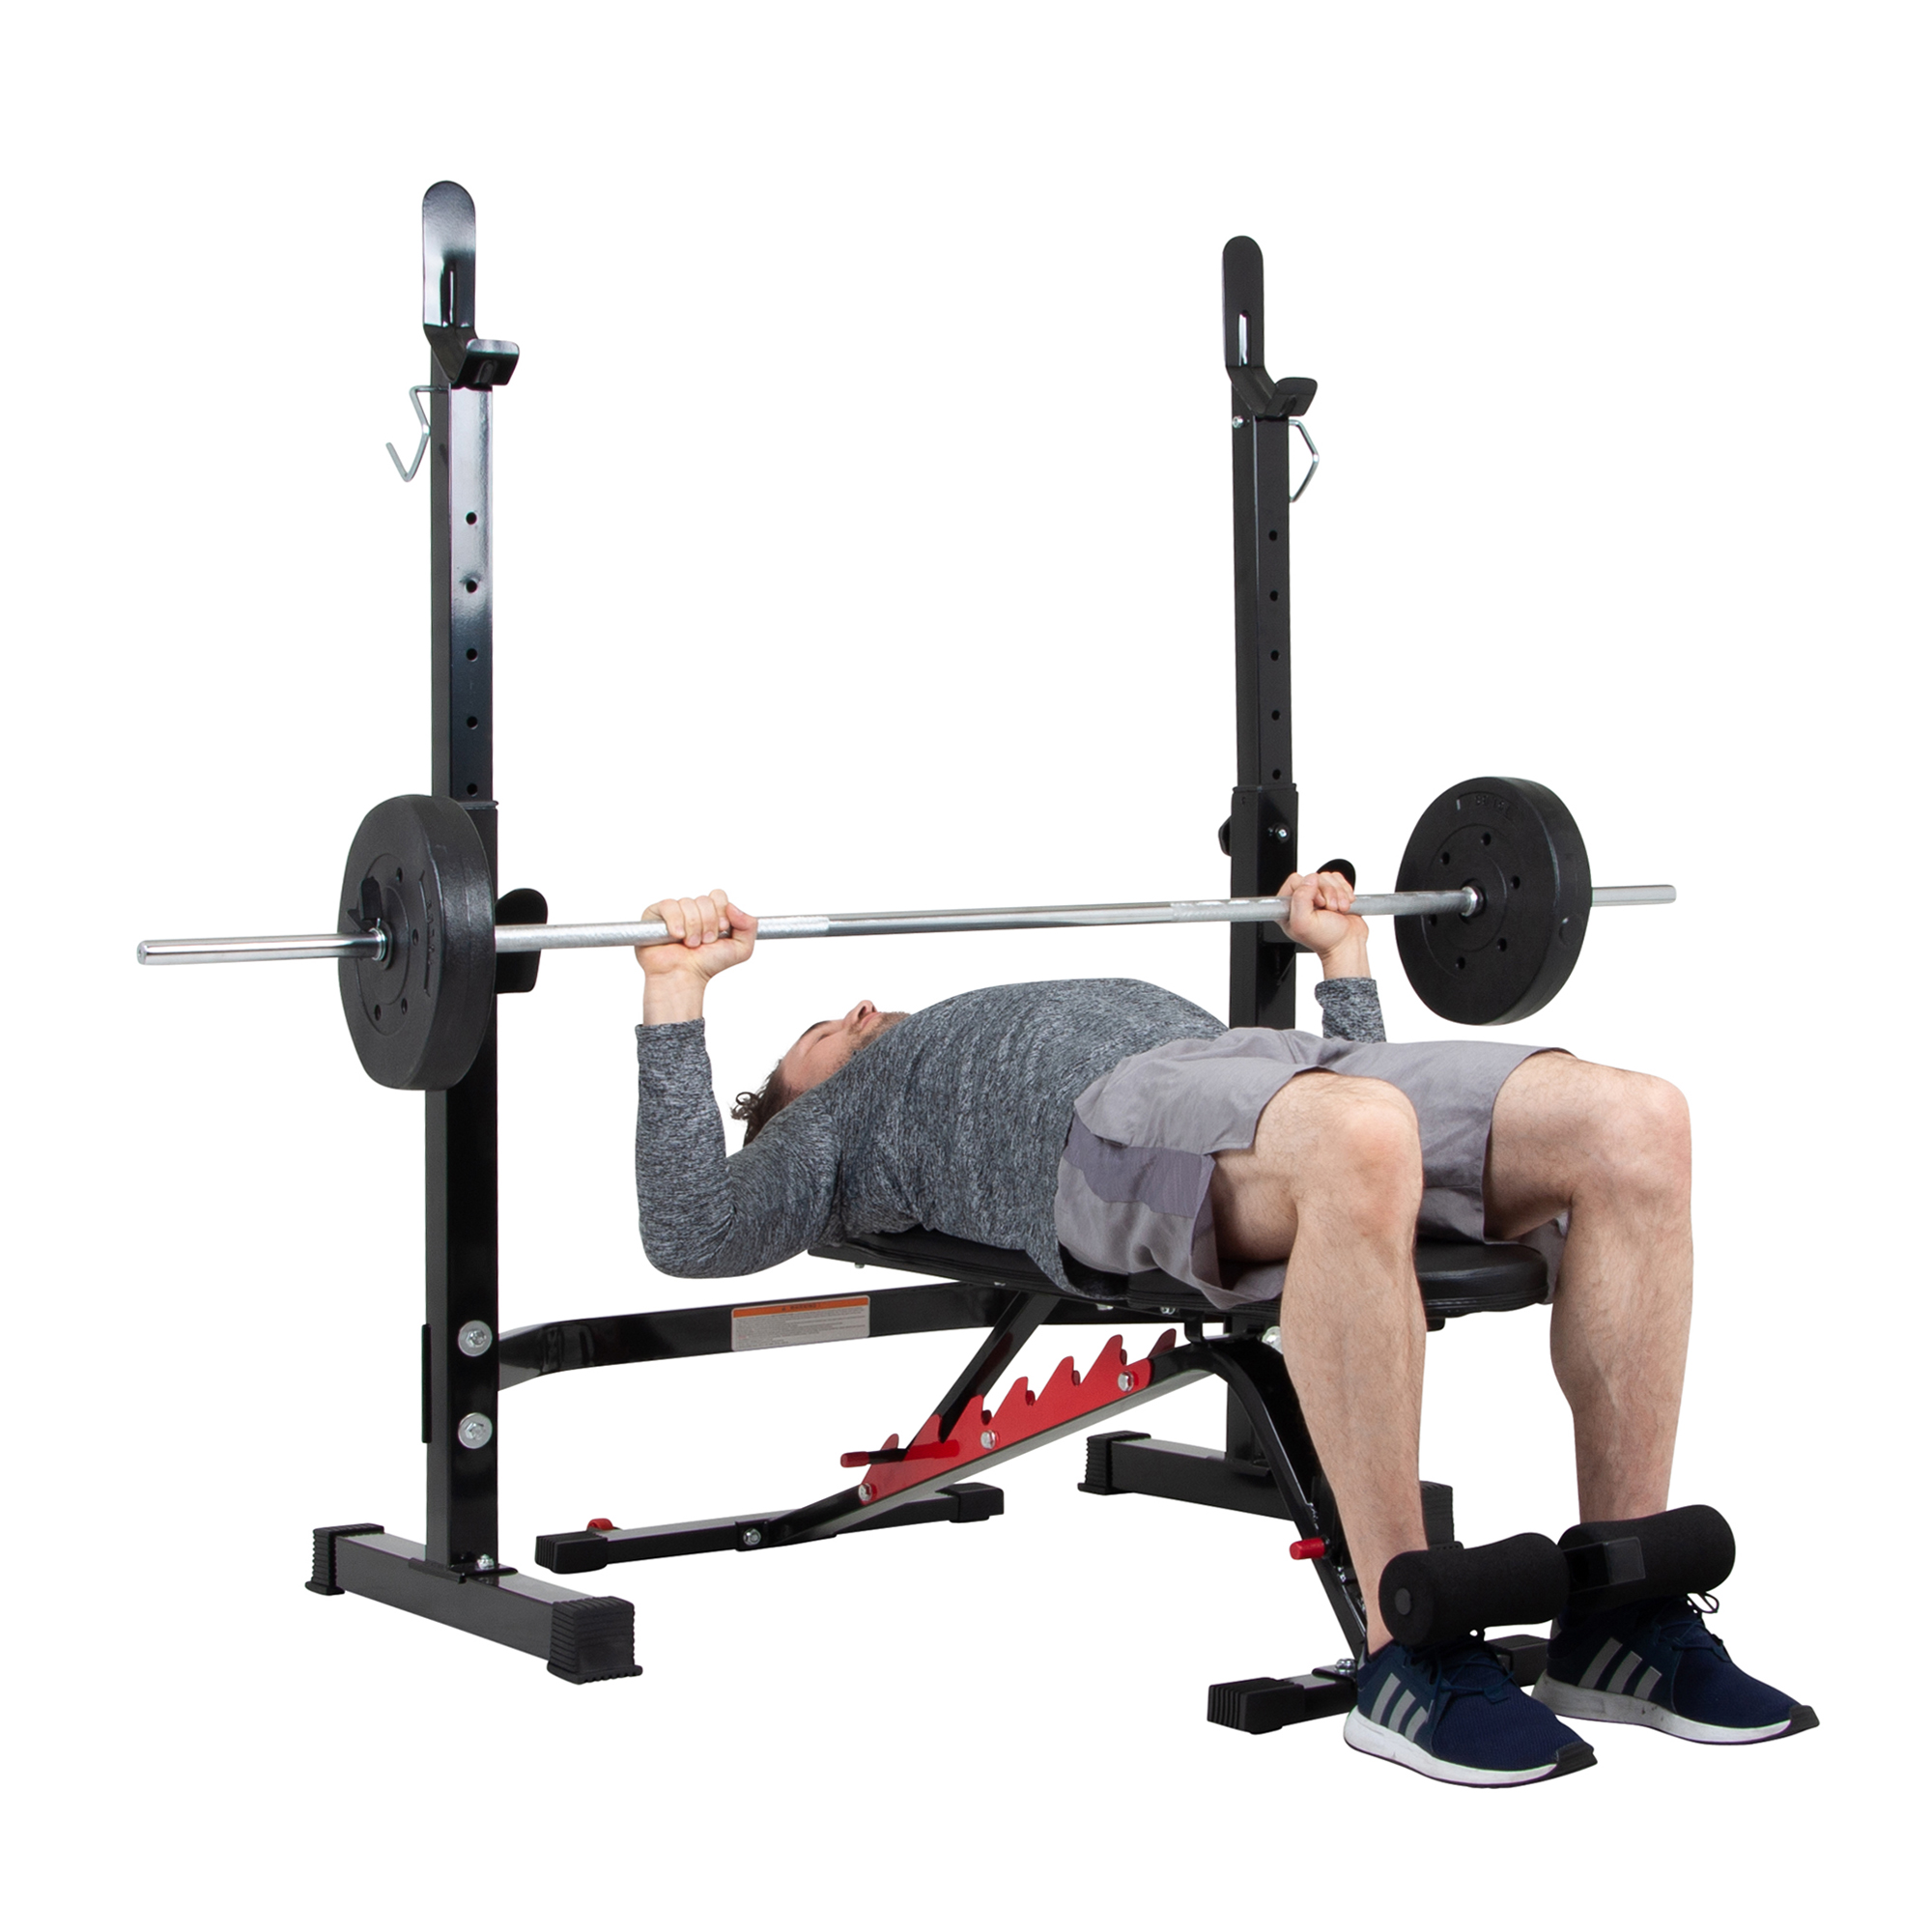 Body Champ BCB3578 Two-Piece Olympic Weight Bench with Adjustable Rack Combo, Max. Weight 300 lbs. - image 3 of 10